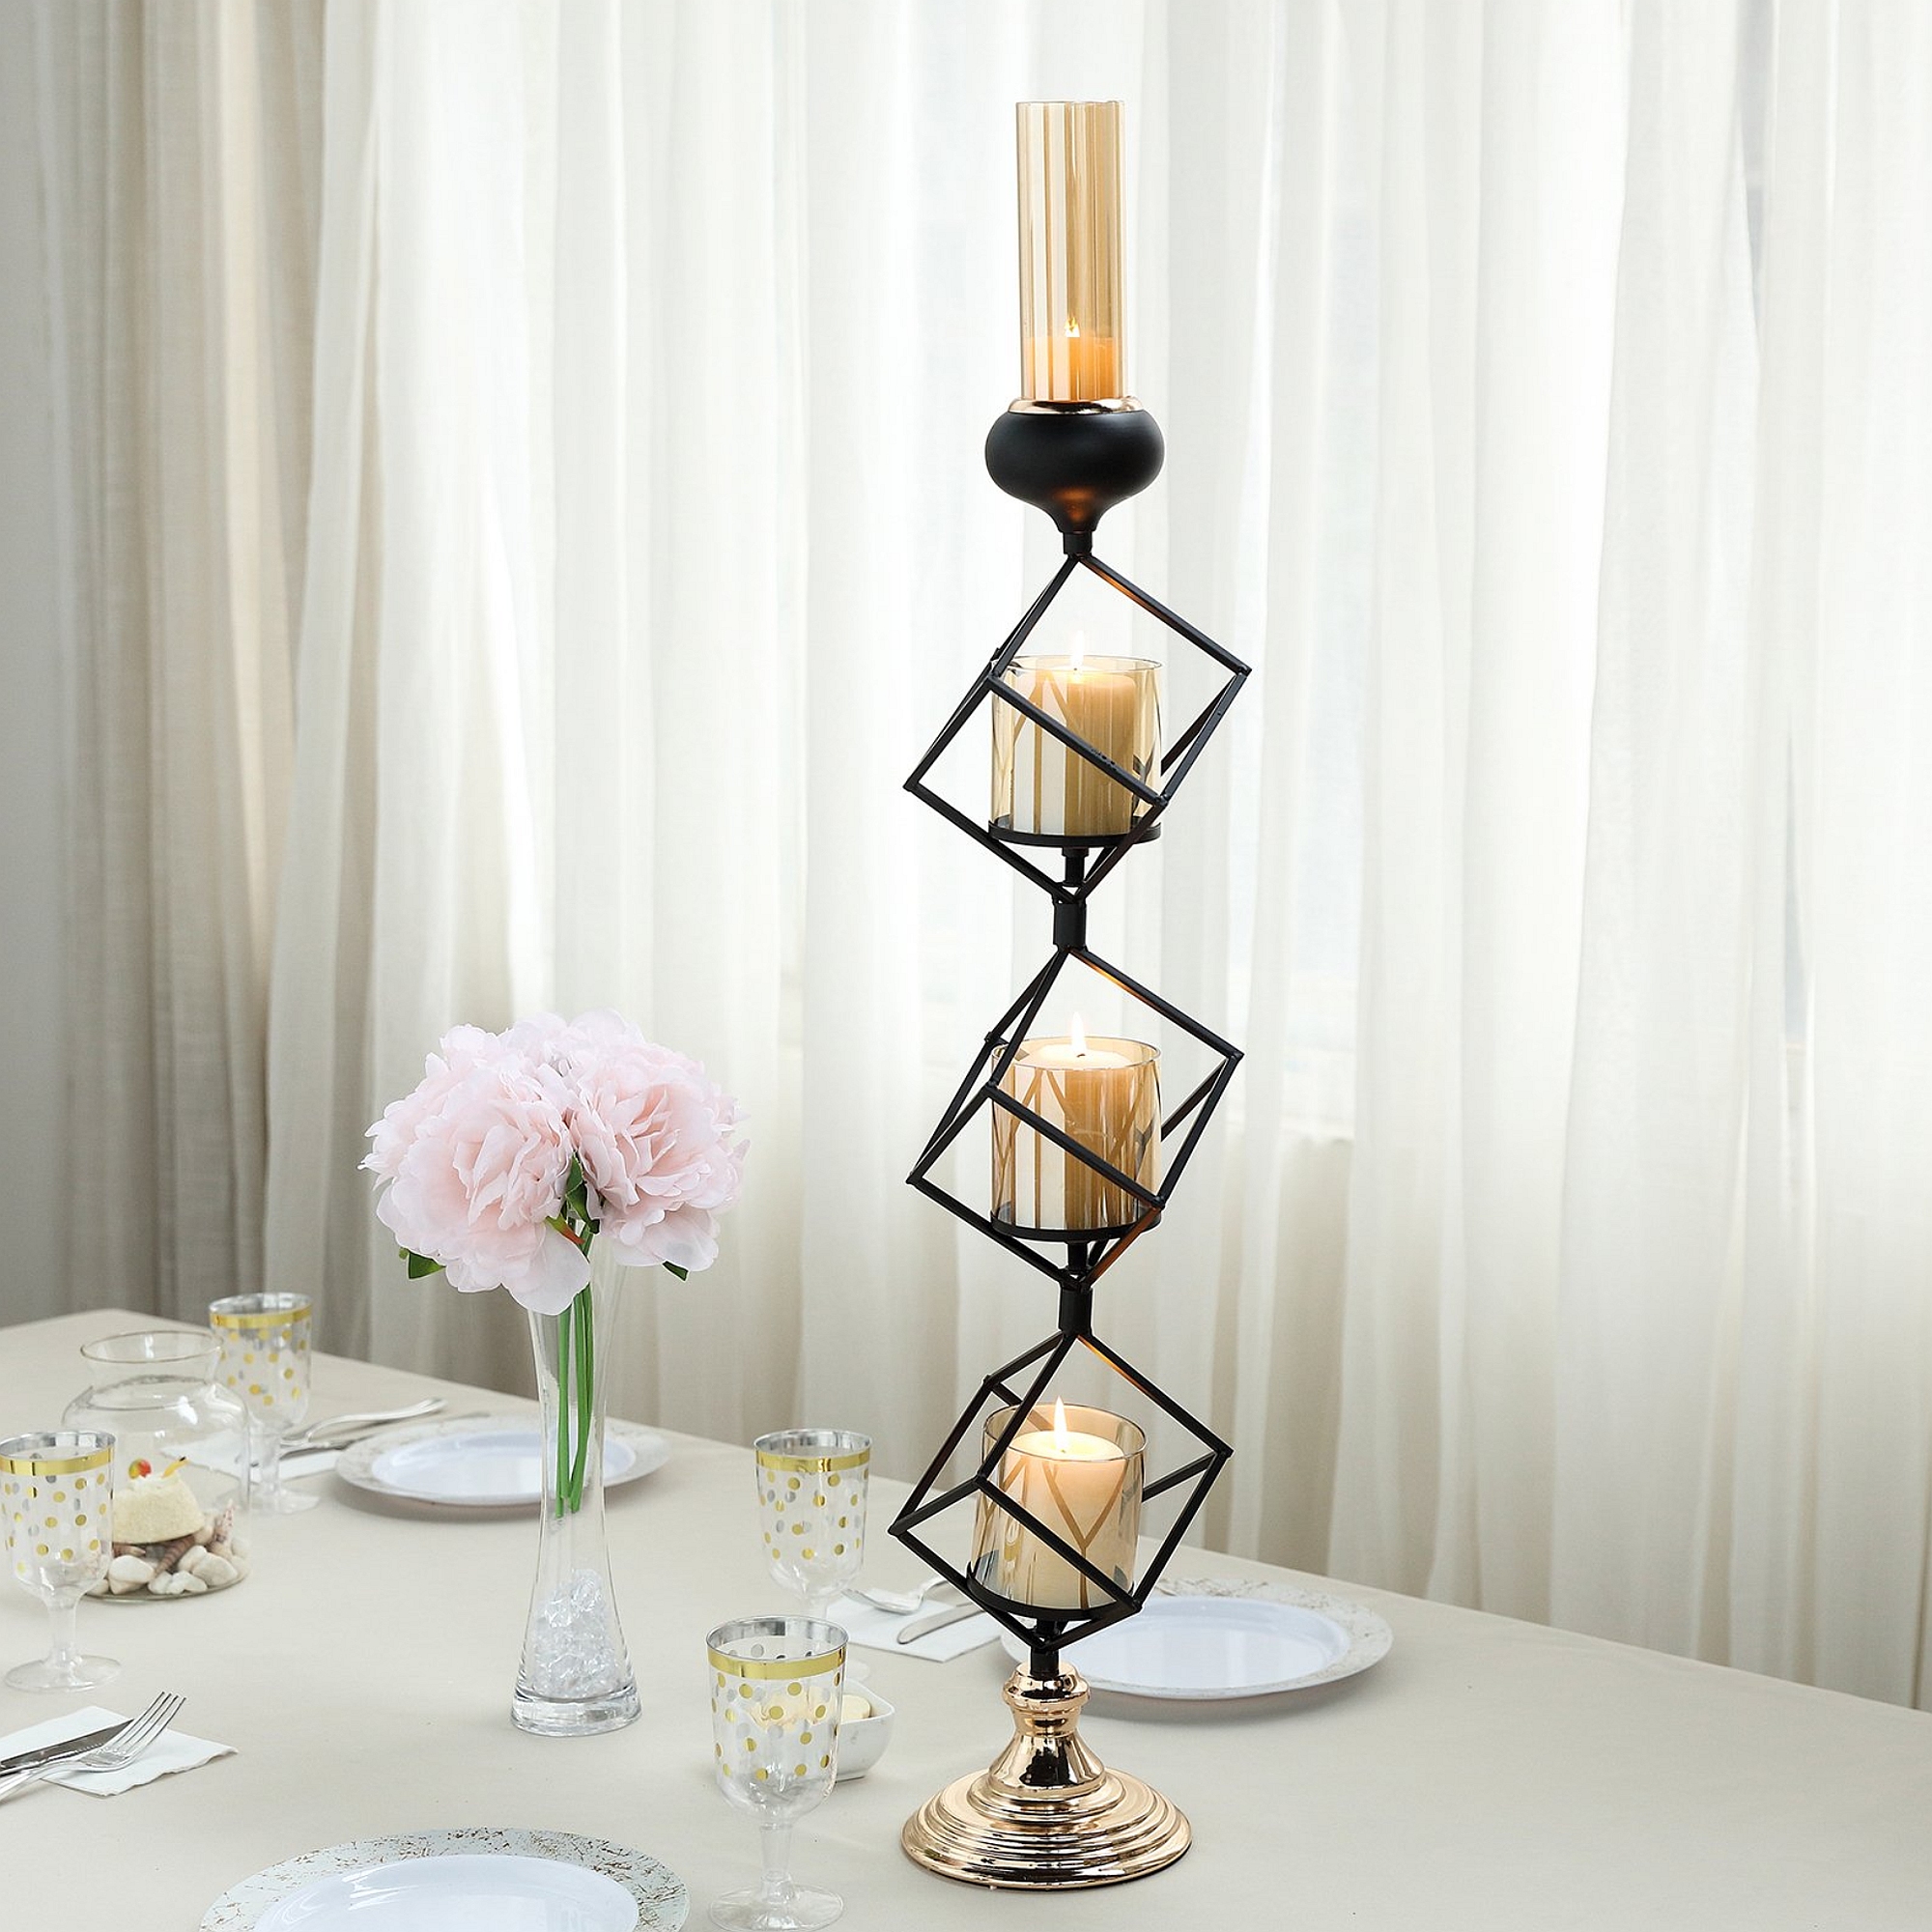 Geometric Candle Holders Wholesale with Amber Glass Votives